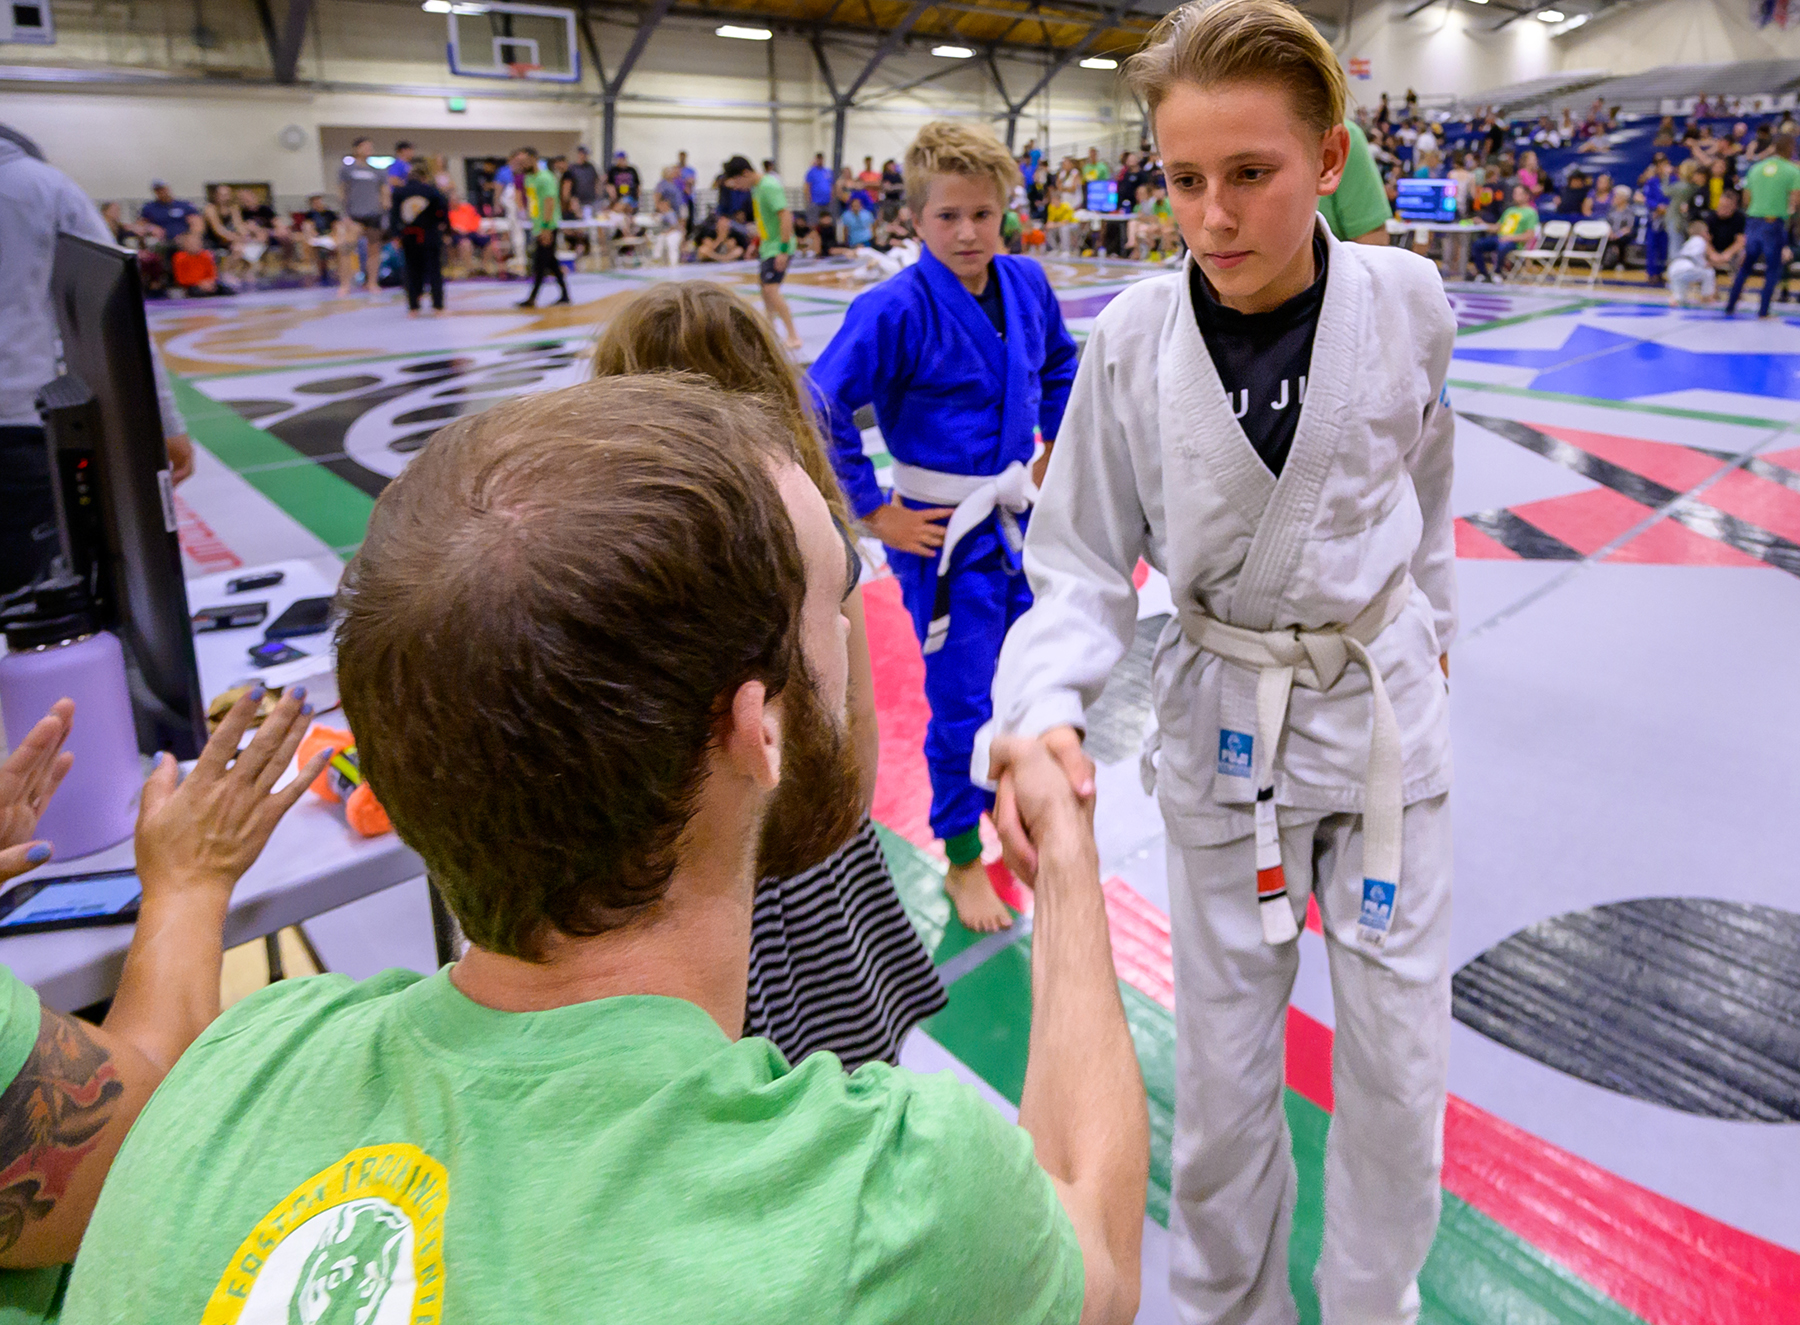 An image of a boy shaking his opponent's coach's hand after their match during a kids jiu-jitsu competition at Easton.